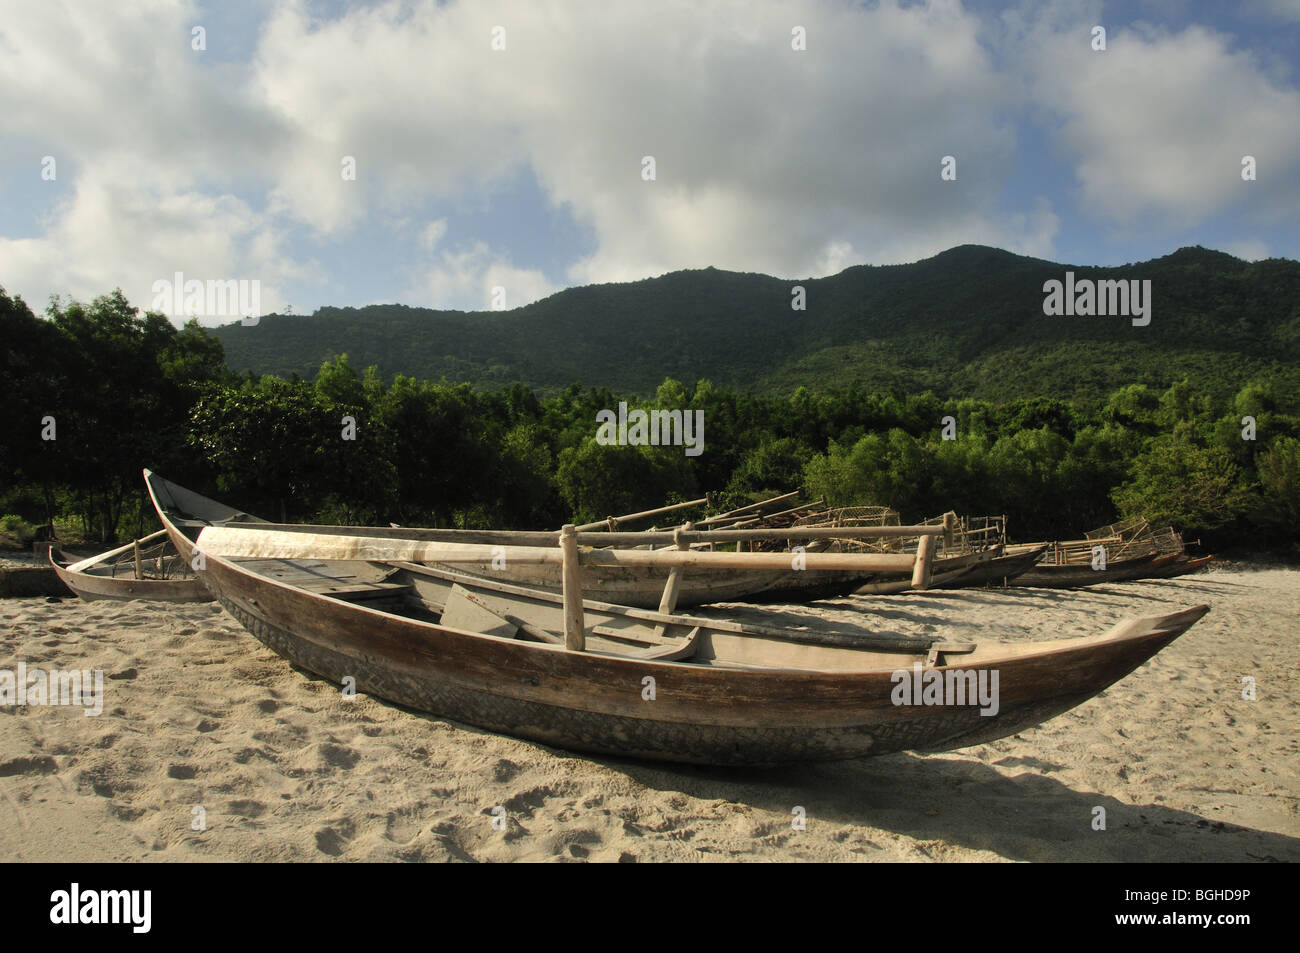 Wooden fishing canoes on a topical beach Stock Photo